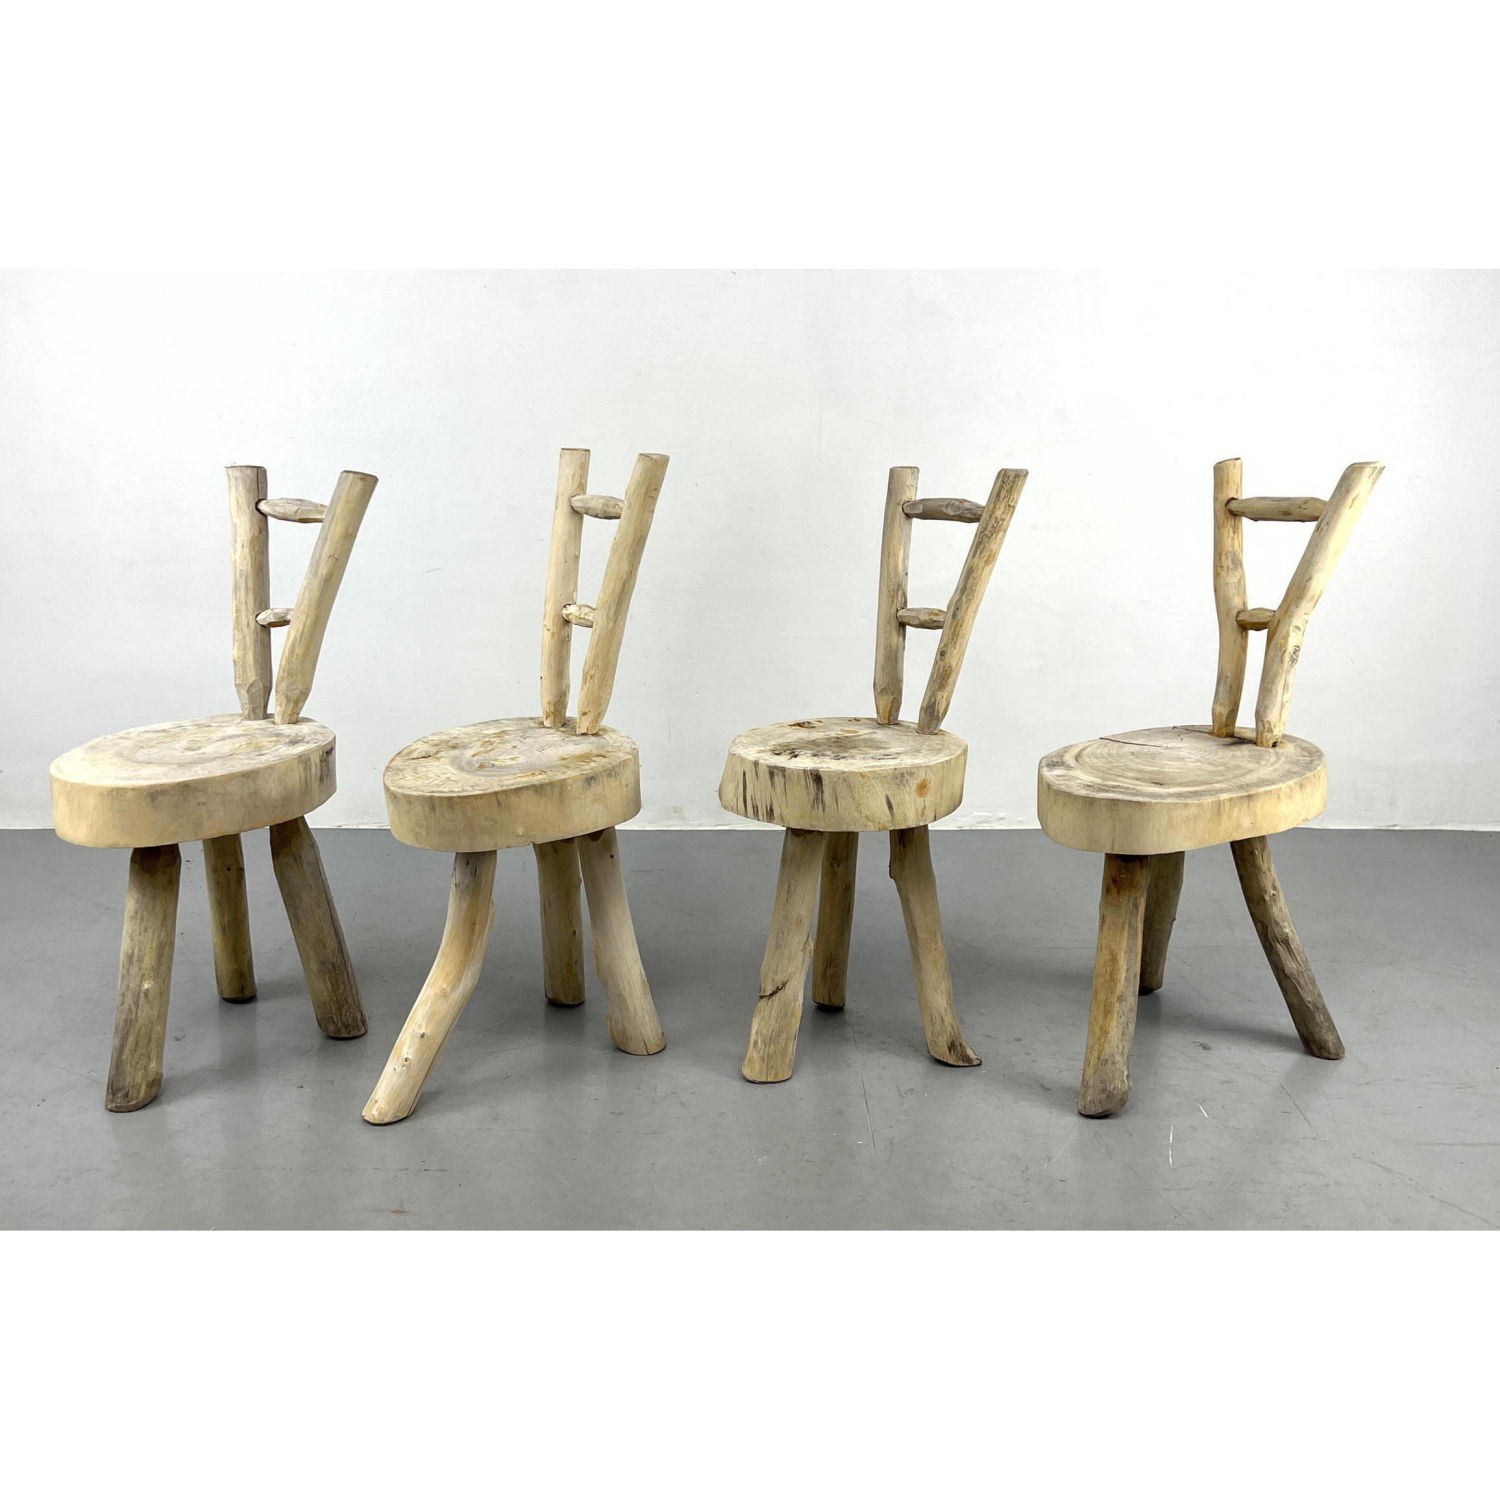 Rustic Pine Chairs from Swiss Alps.